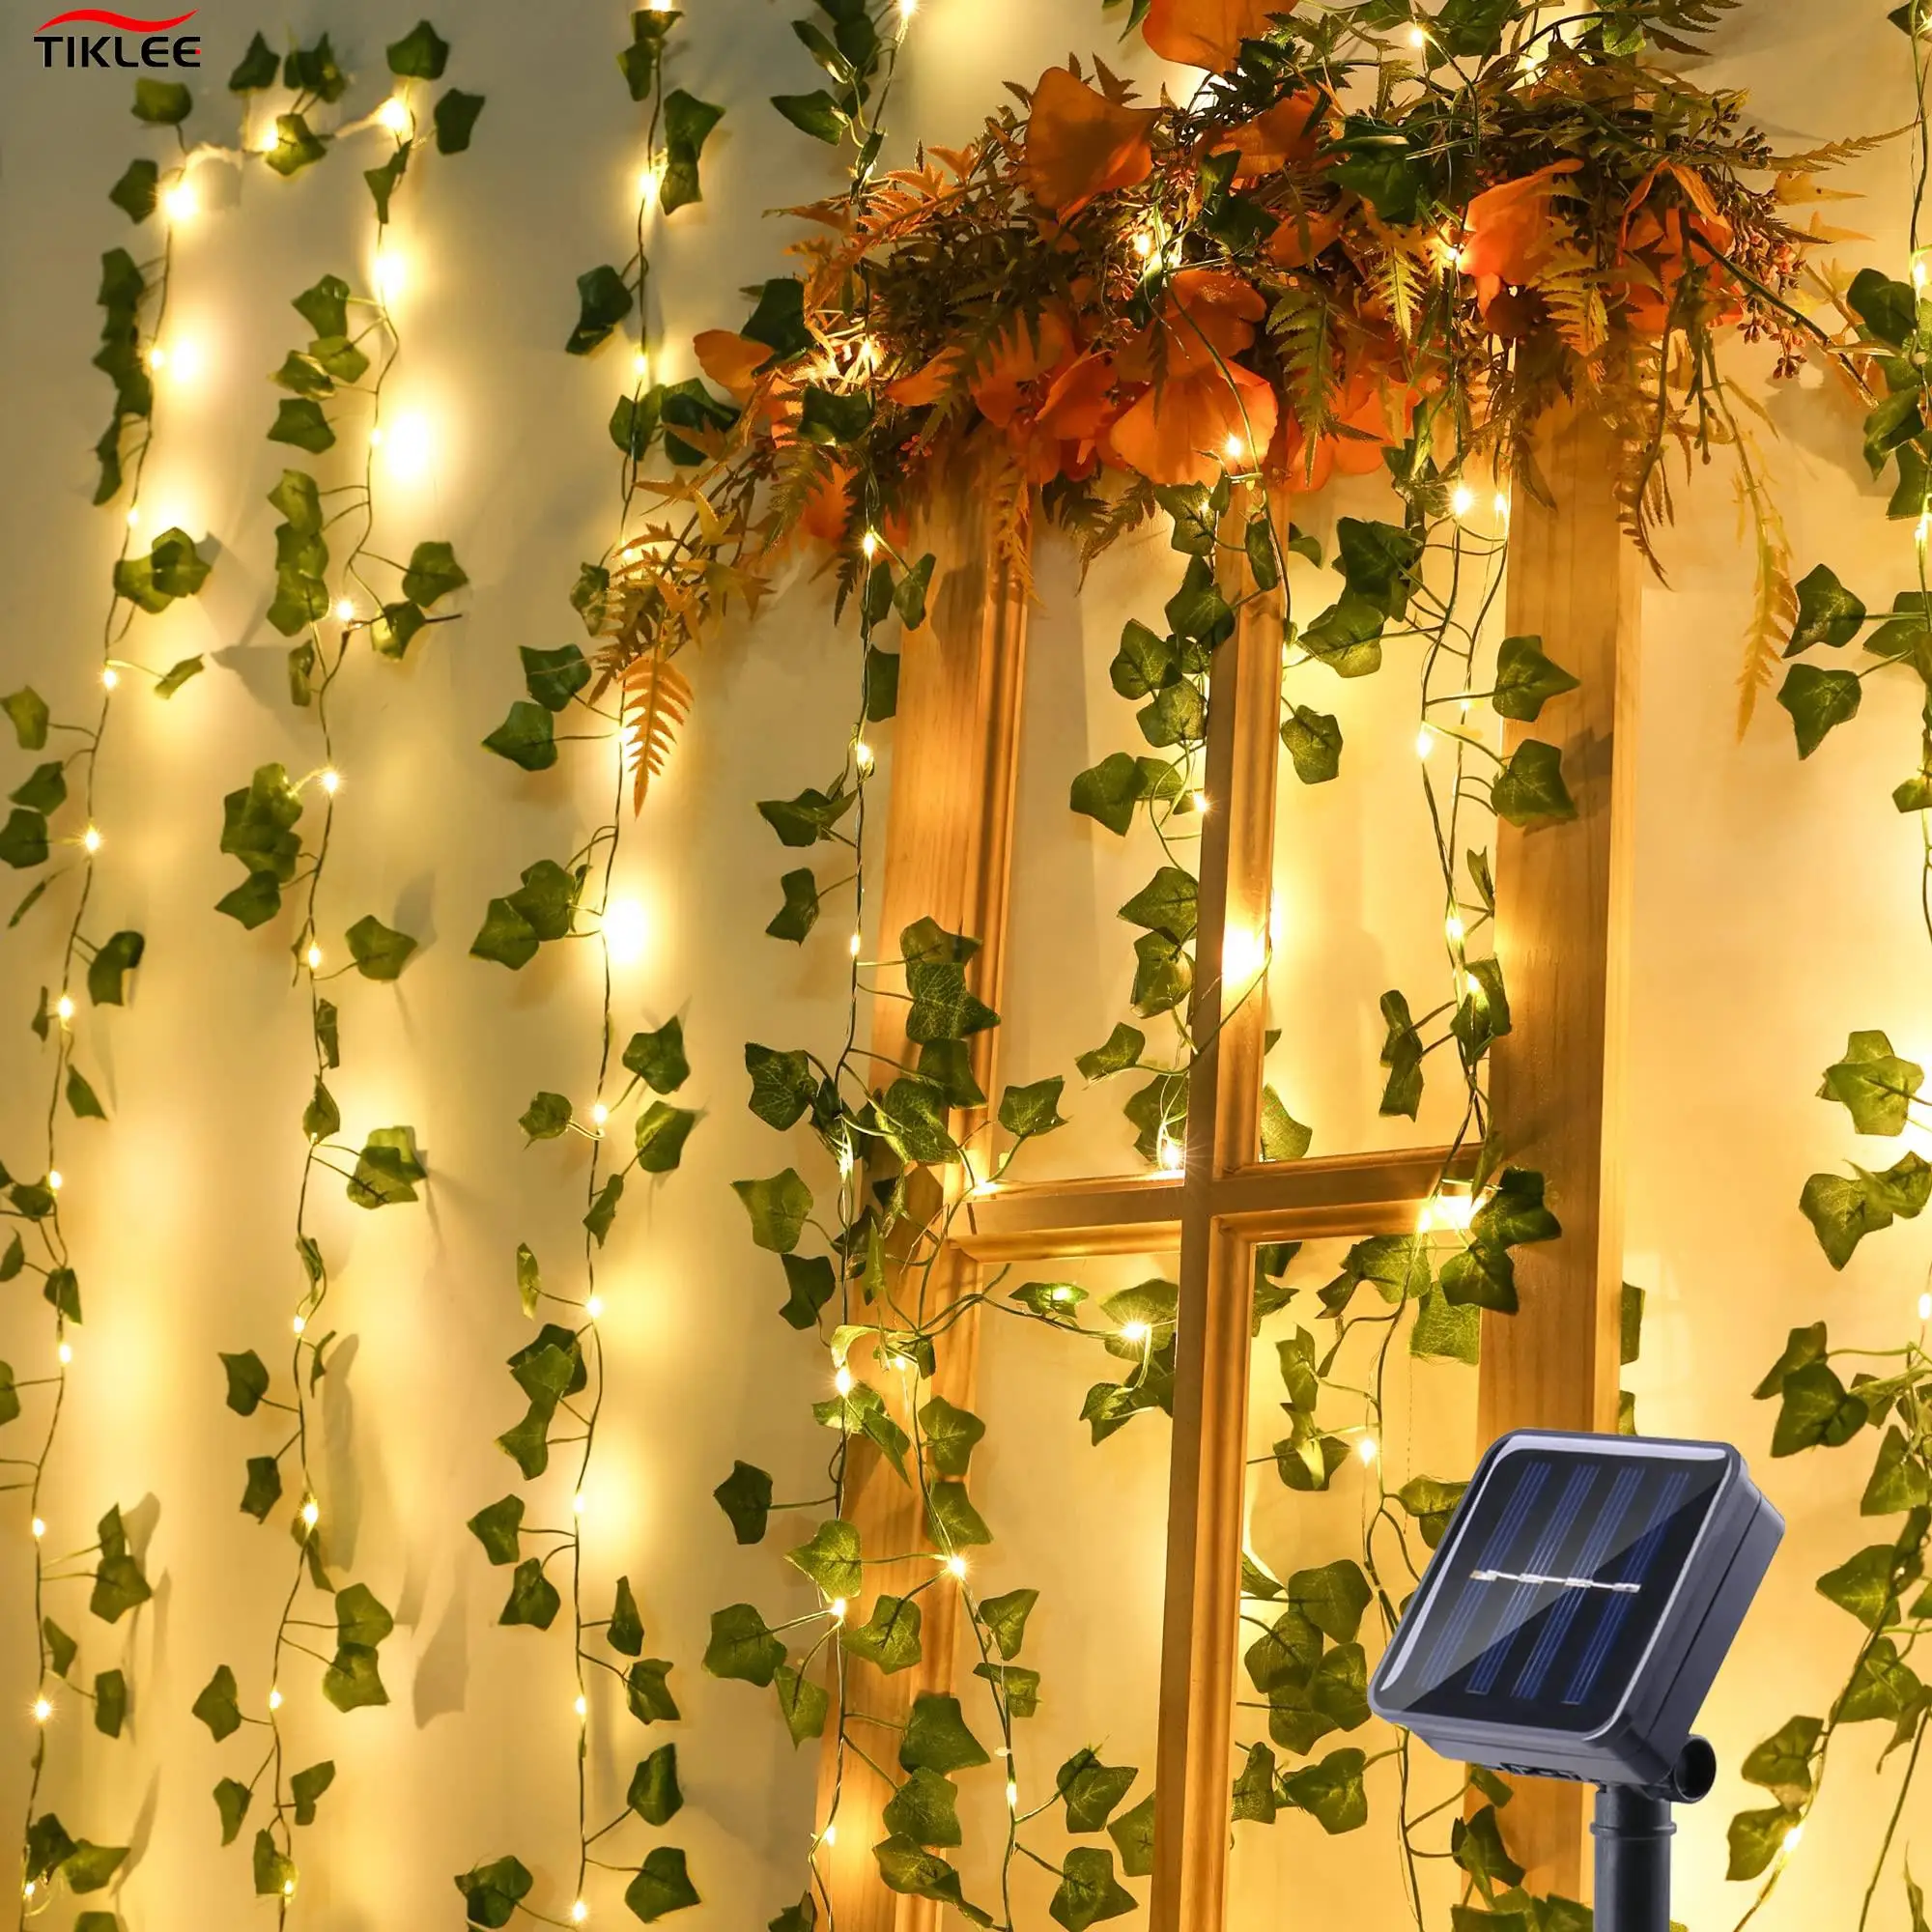 50/100 Solar Leds Green Leaf Fairy Lights String Artificial Ivy Garland Copper Light Strings for Wedding Bedroom Decorations laser stage light christmas mini usb rechargeable replacement mount colorful spot stand lights switch consola ktv decorations